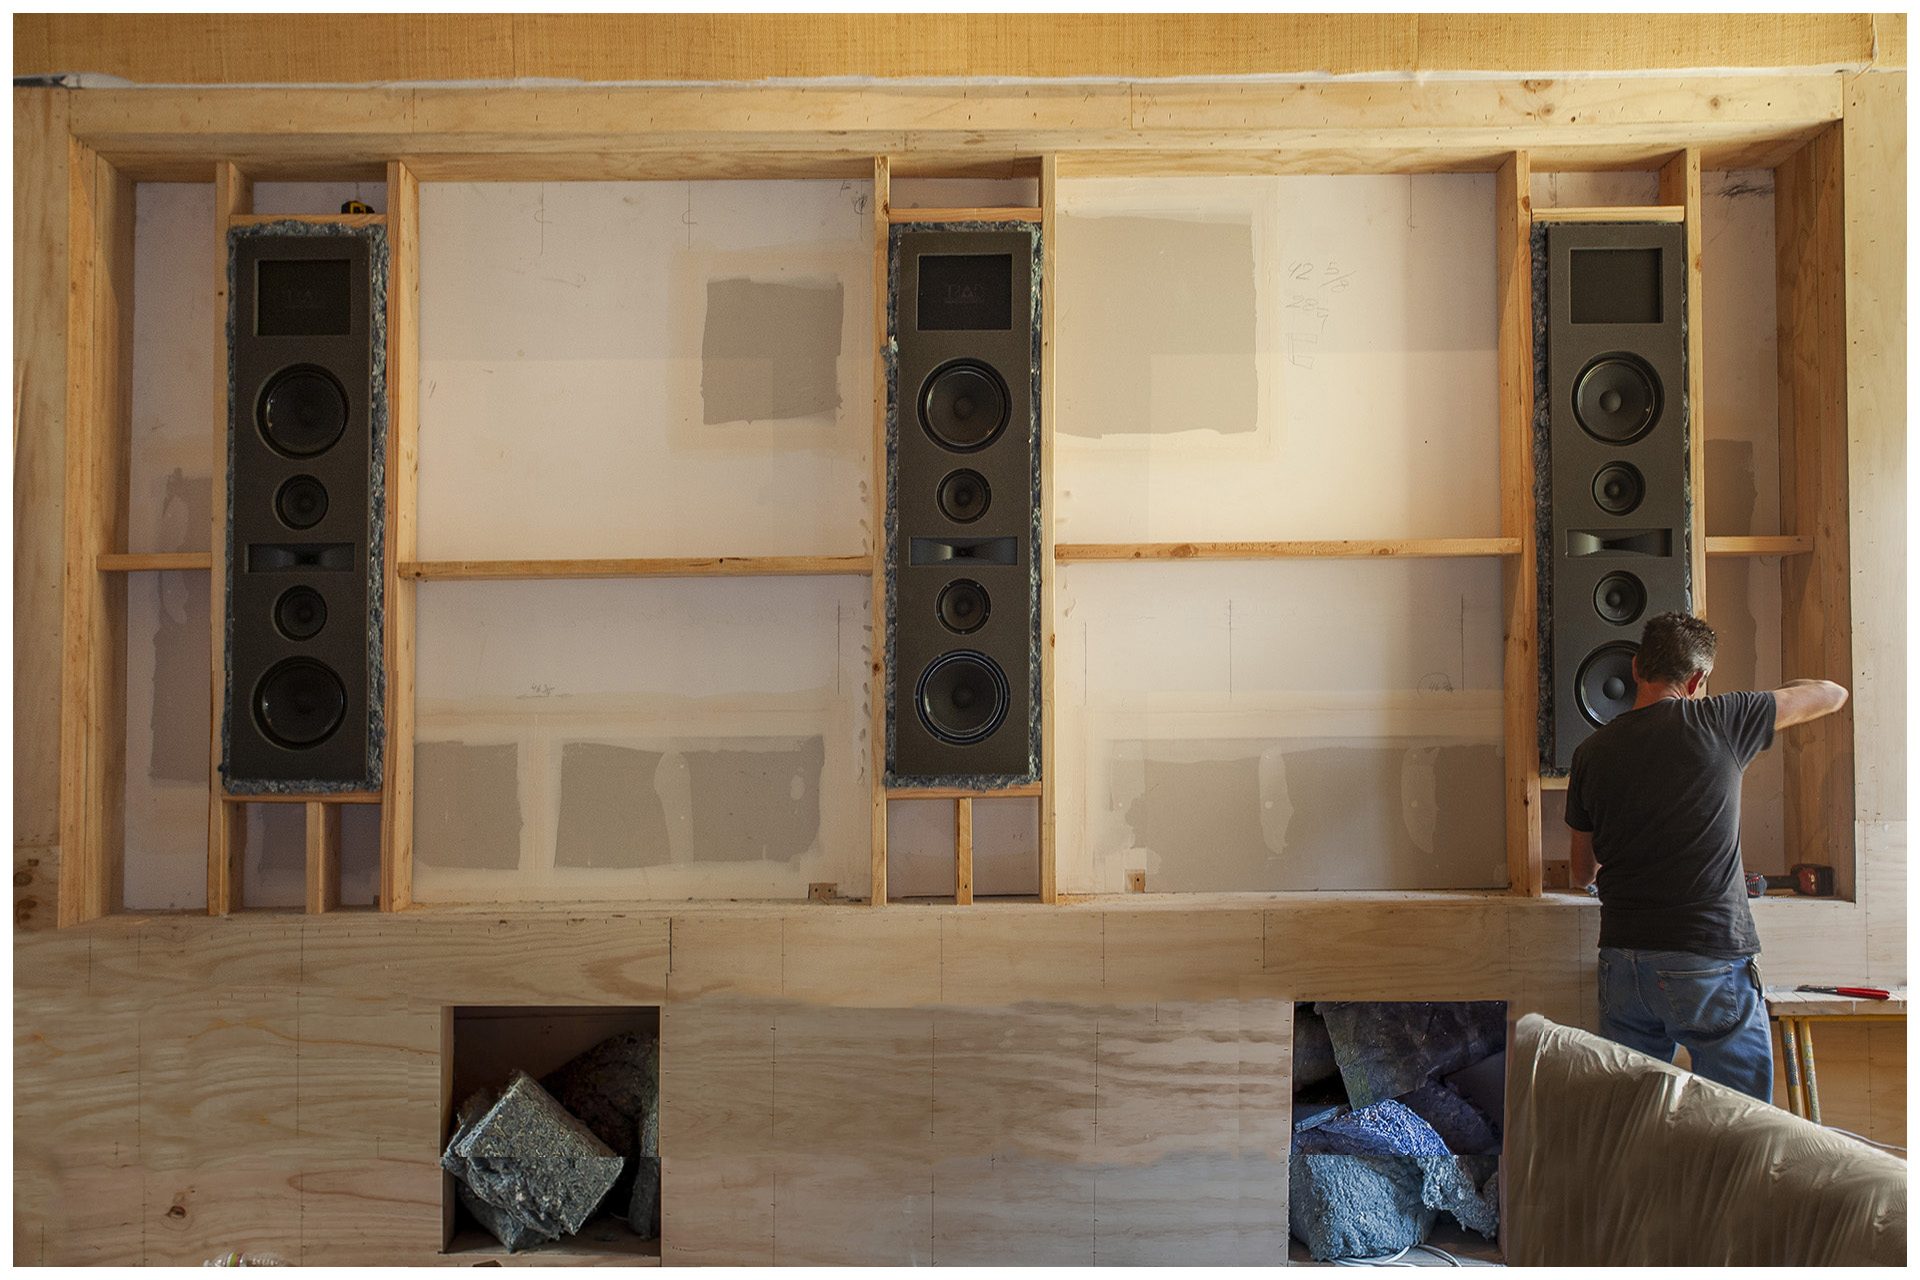 DEDICATED LARGE THEATER Front speakers were secured in between framing we created, speakers are attached to framing with isolation materials and fasteners in order to prevent vibration transfer to framing.